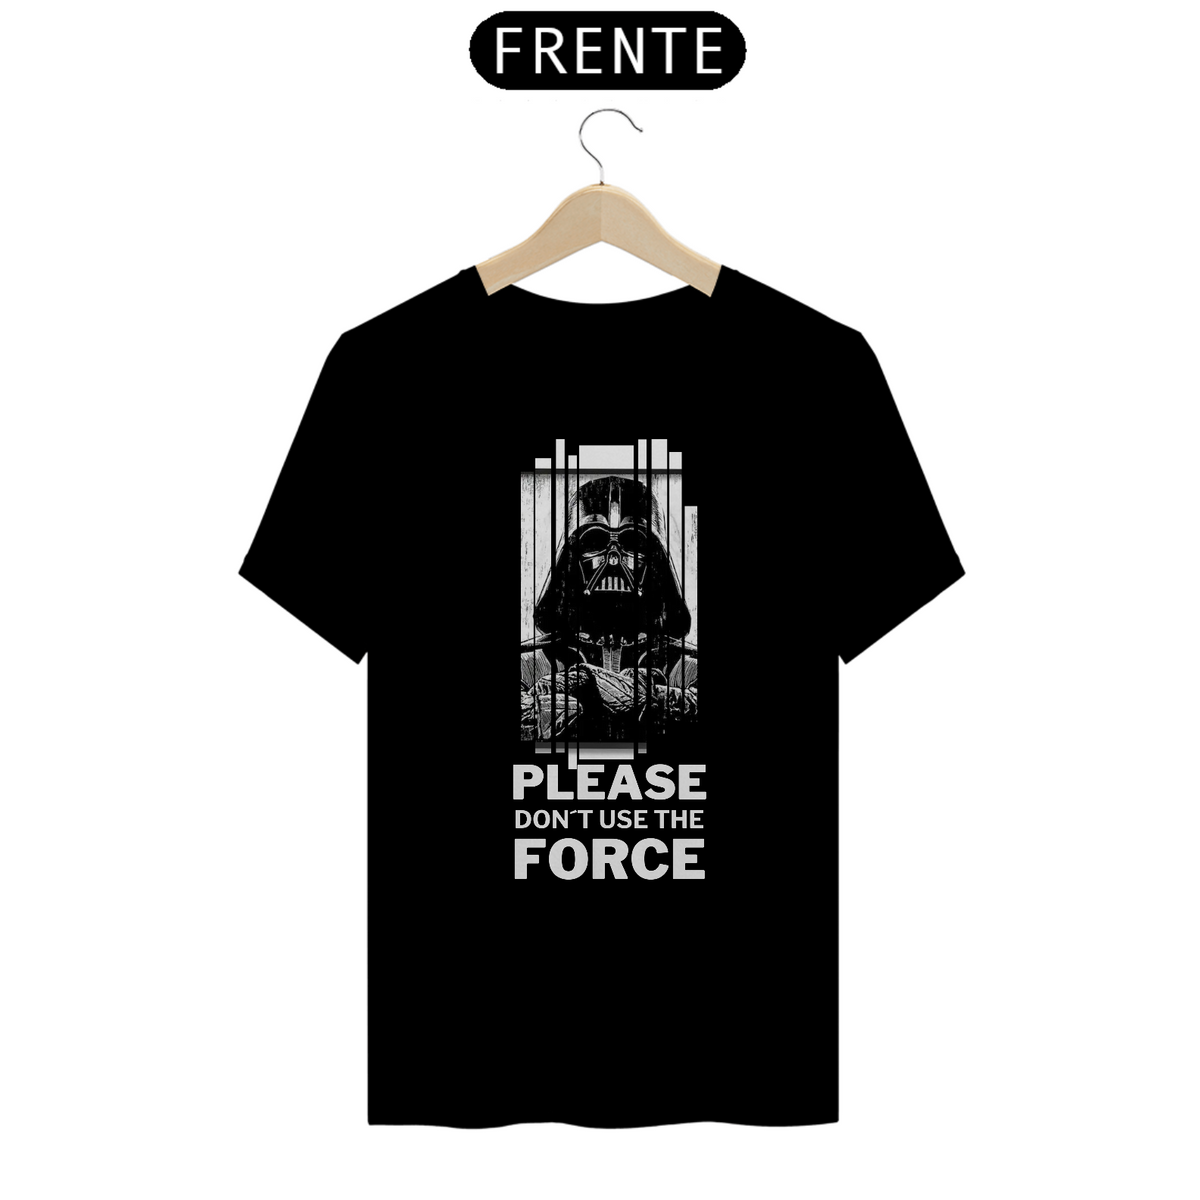 Nome do produto: Please don´t the use force